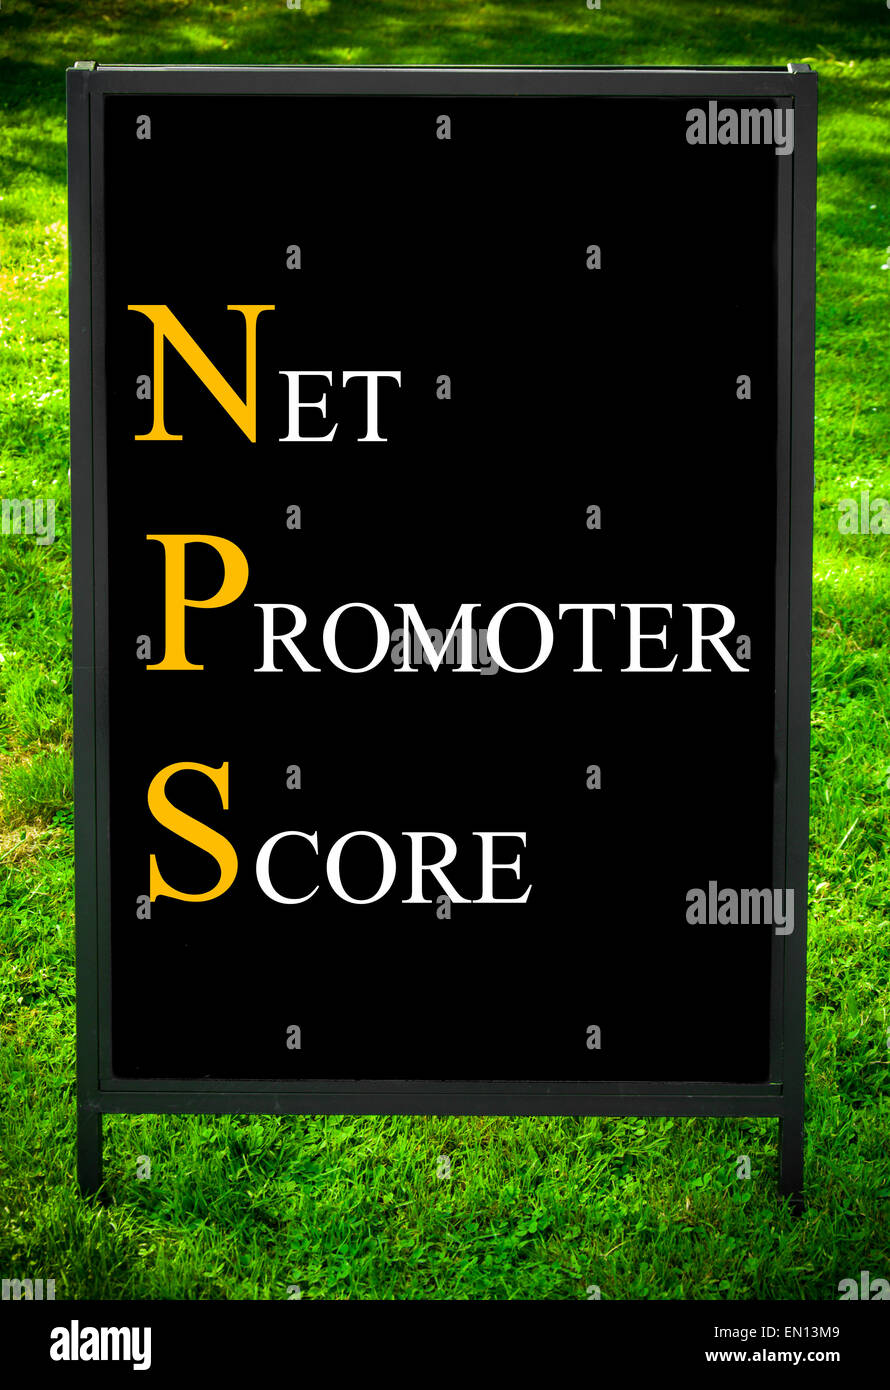 Business Acronym NPS as NET PROMOTER SCORE. Message on sidewalk blackboard sign against green grass background. Concept image Stock Photo